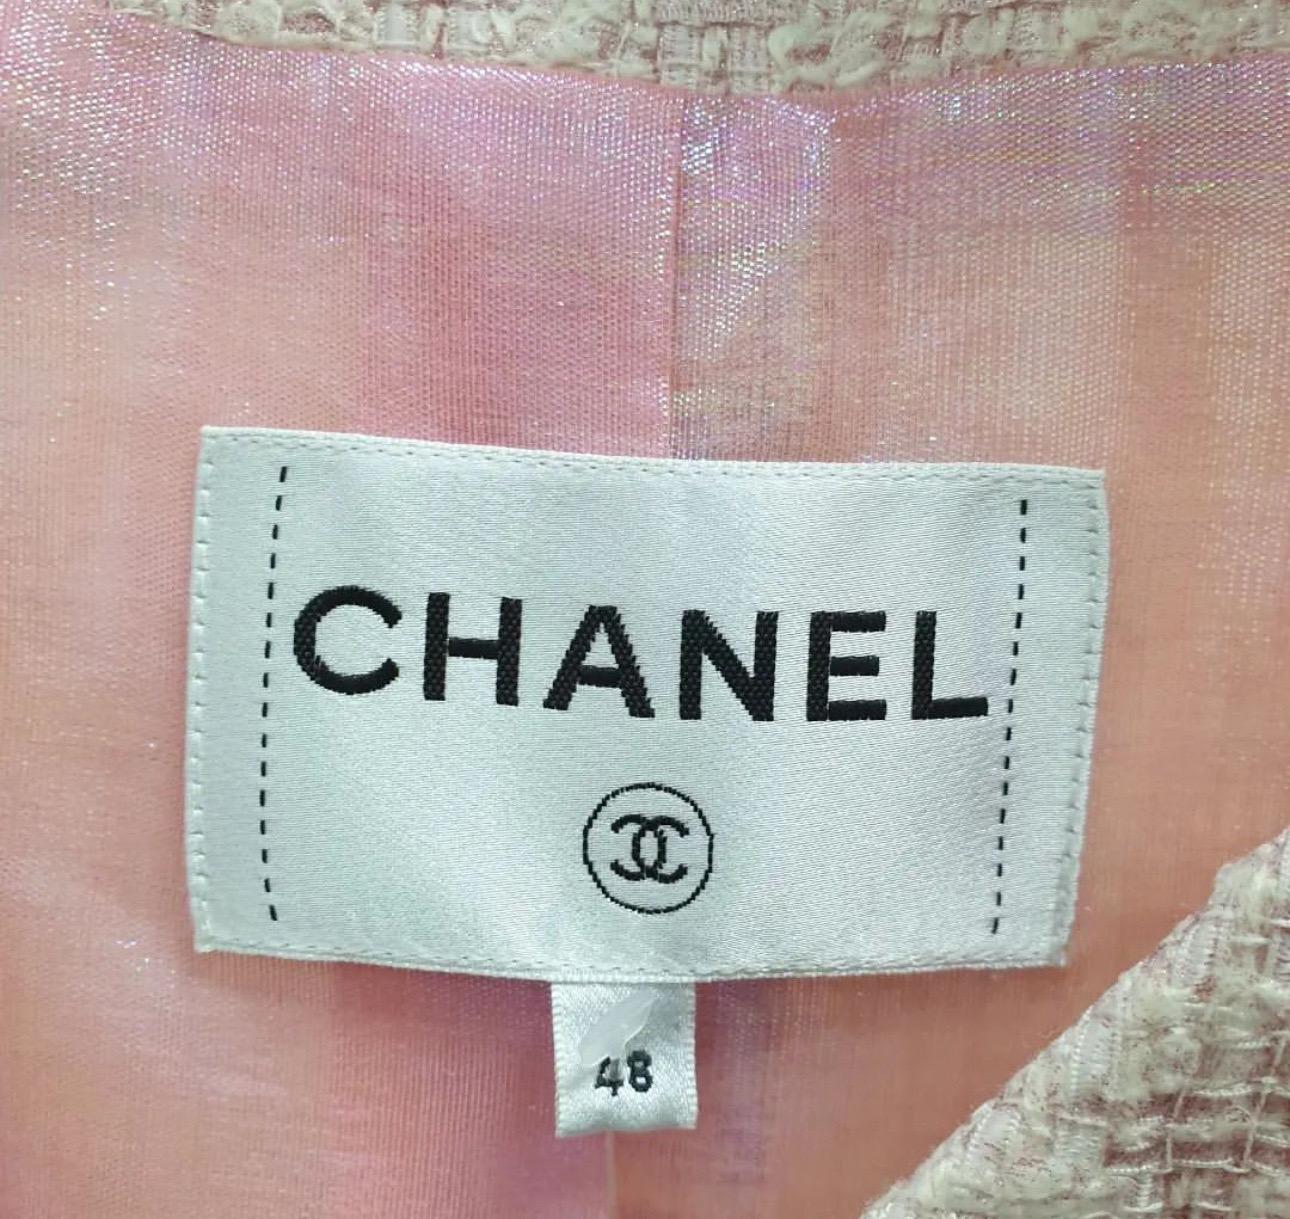 Stunning Chanel lightweight coat from the Spring 2016 collection. 
Made from candy pink and white basket weave polyester and silk mix with a fabulous iridescent polyester and cotton sheer metallic lining. 
It has slightly flared fit with slit front